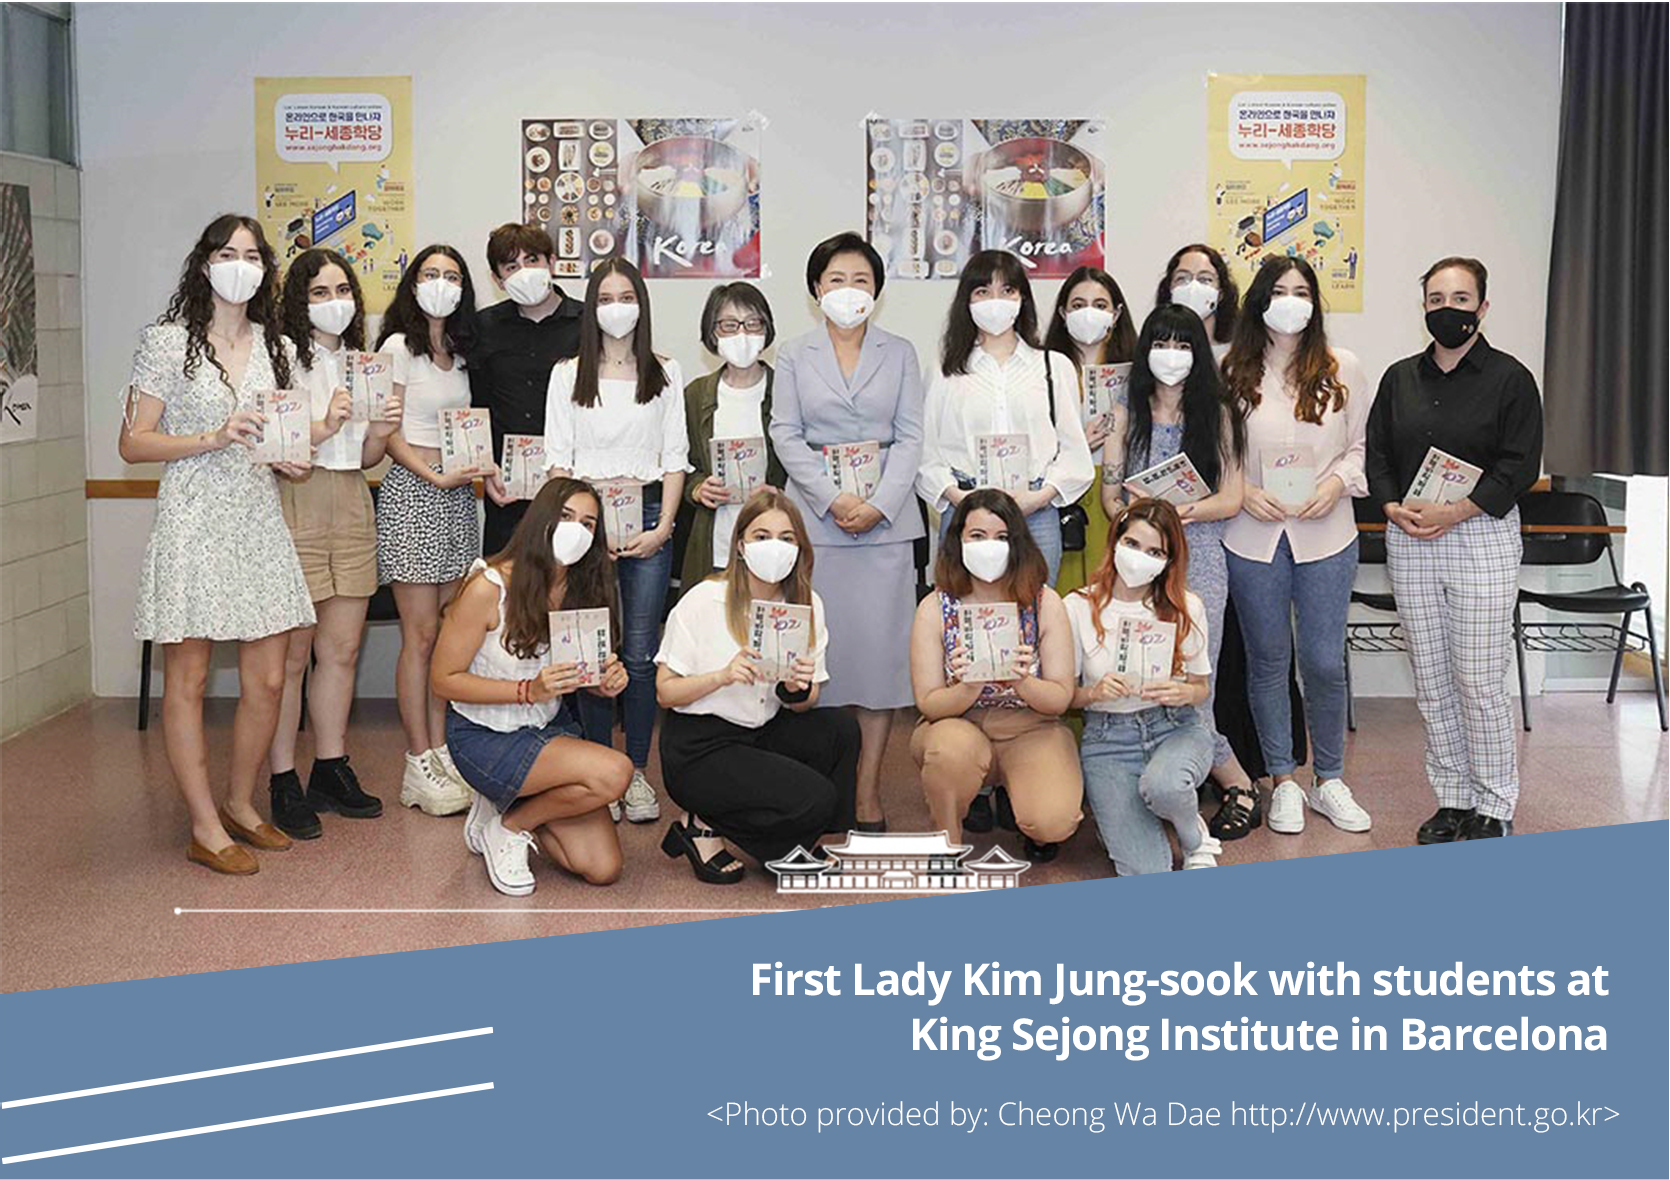 First Lady Kim Jung-sook with students at King Sejong Institute in Barcelona <Photo provided by: Cheong Wa Dae http://www.president.go.kr>